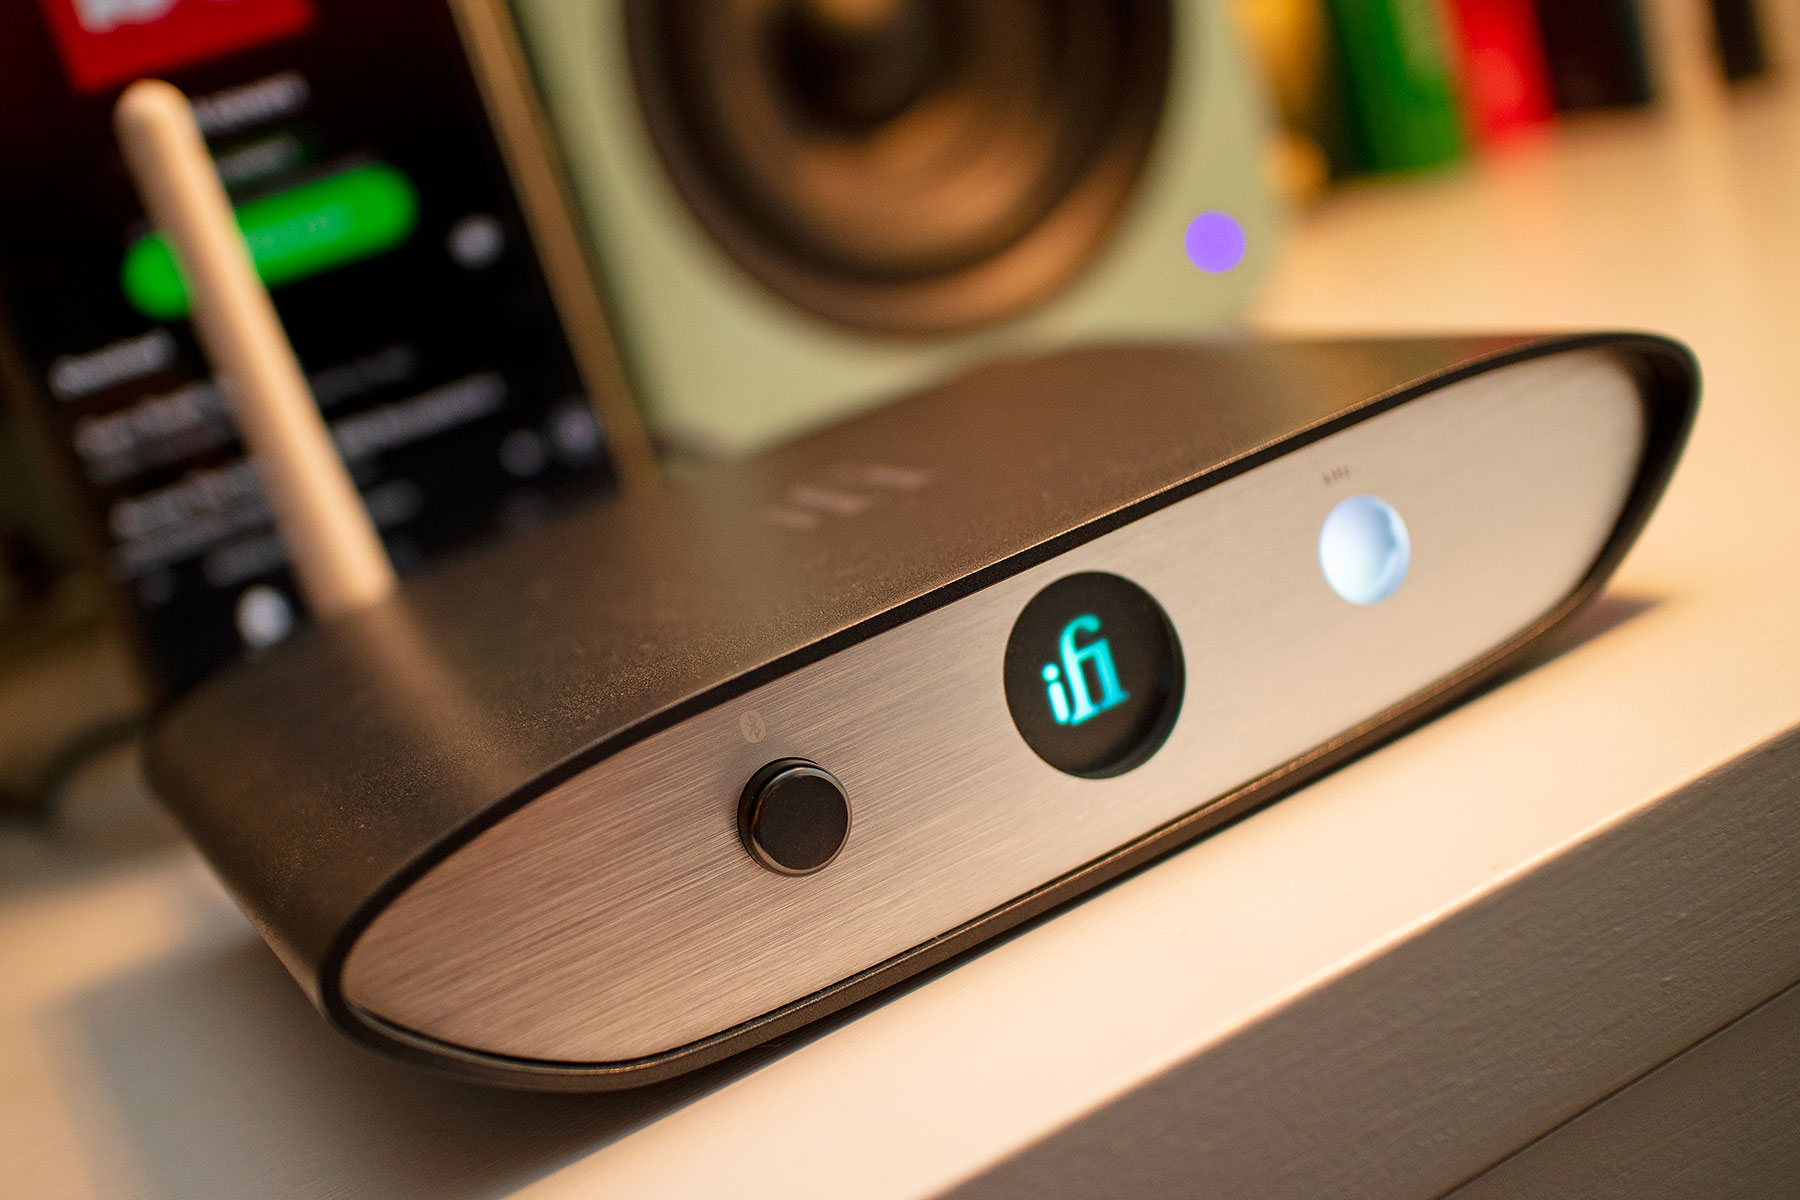 ZEN Blue V2 by iFi audio - The Ultra-Affordable Bluetooth DAC from